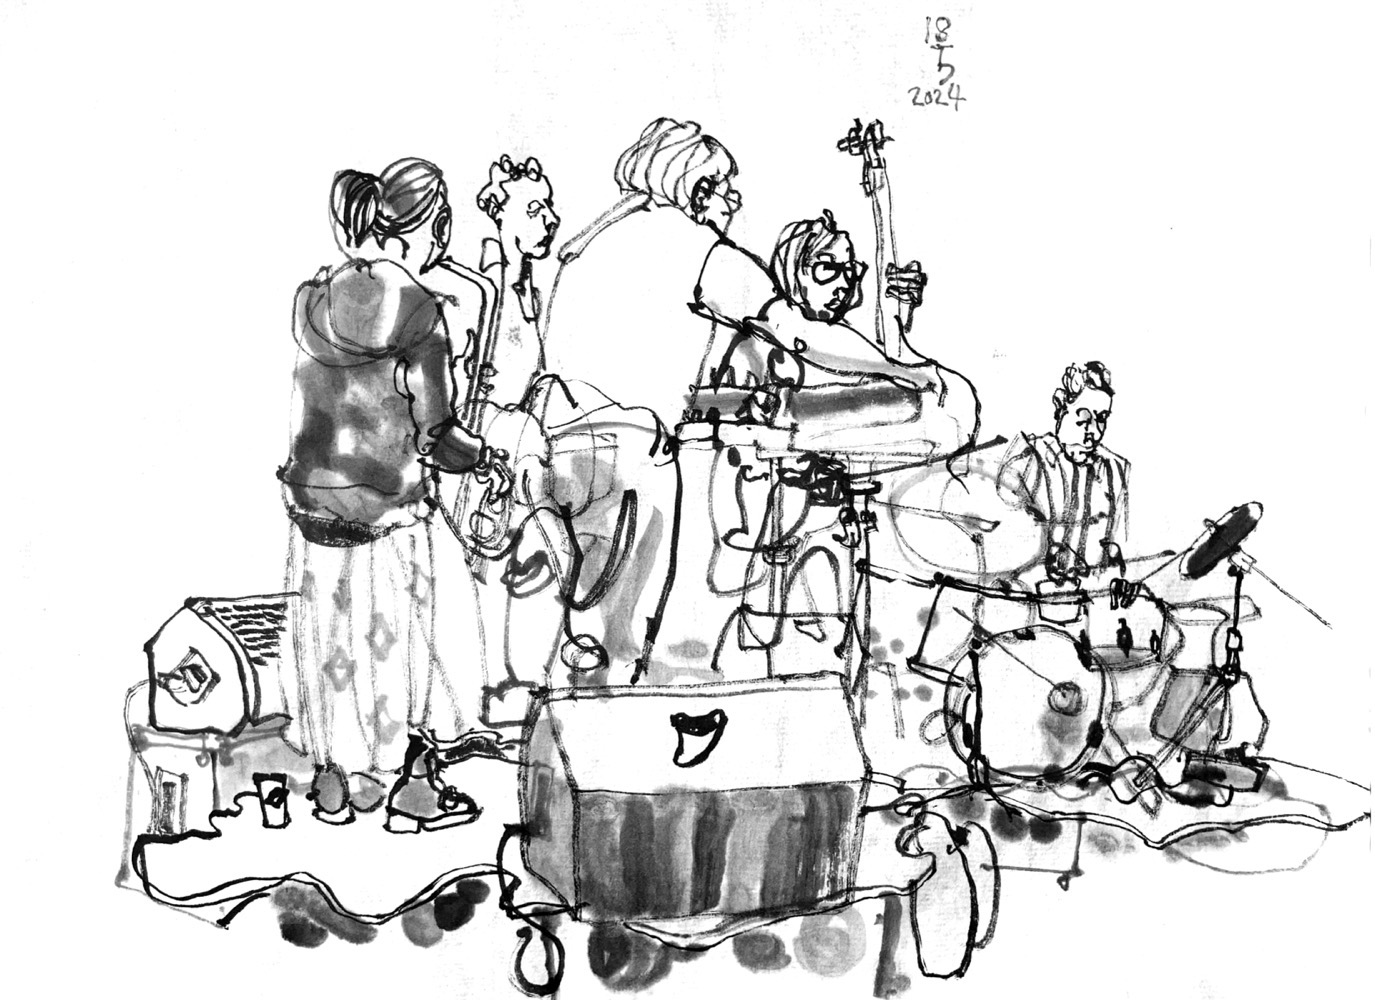 Ink drawing of 5 musicians.